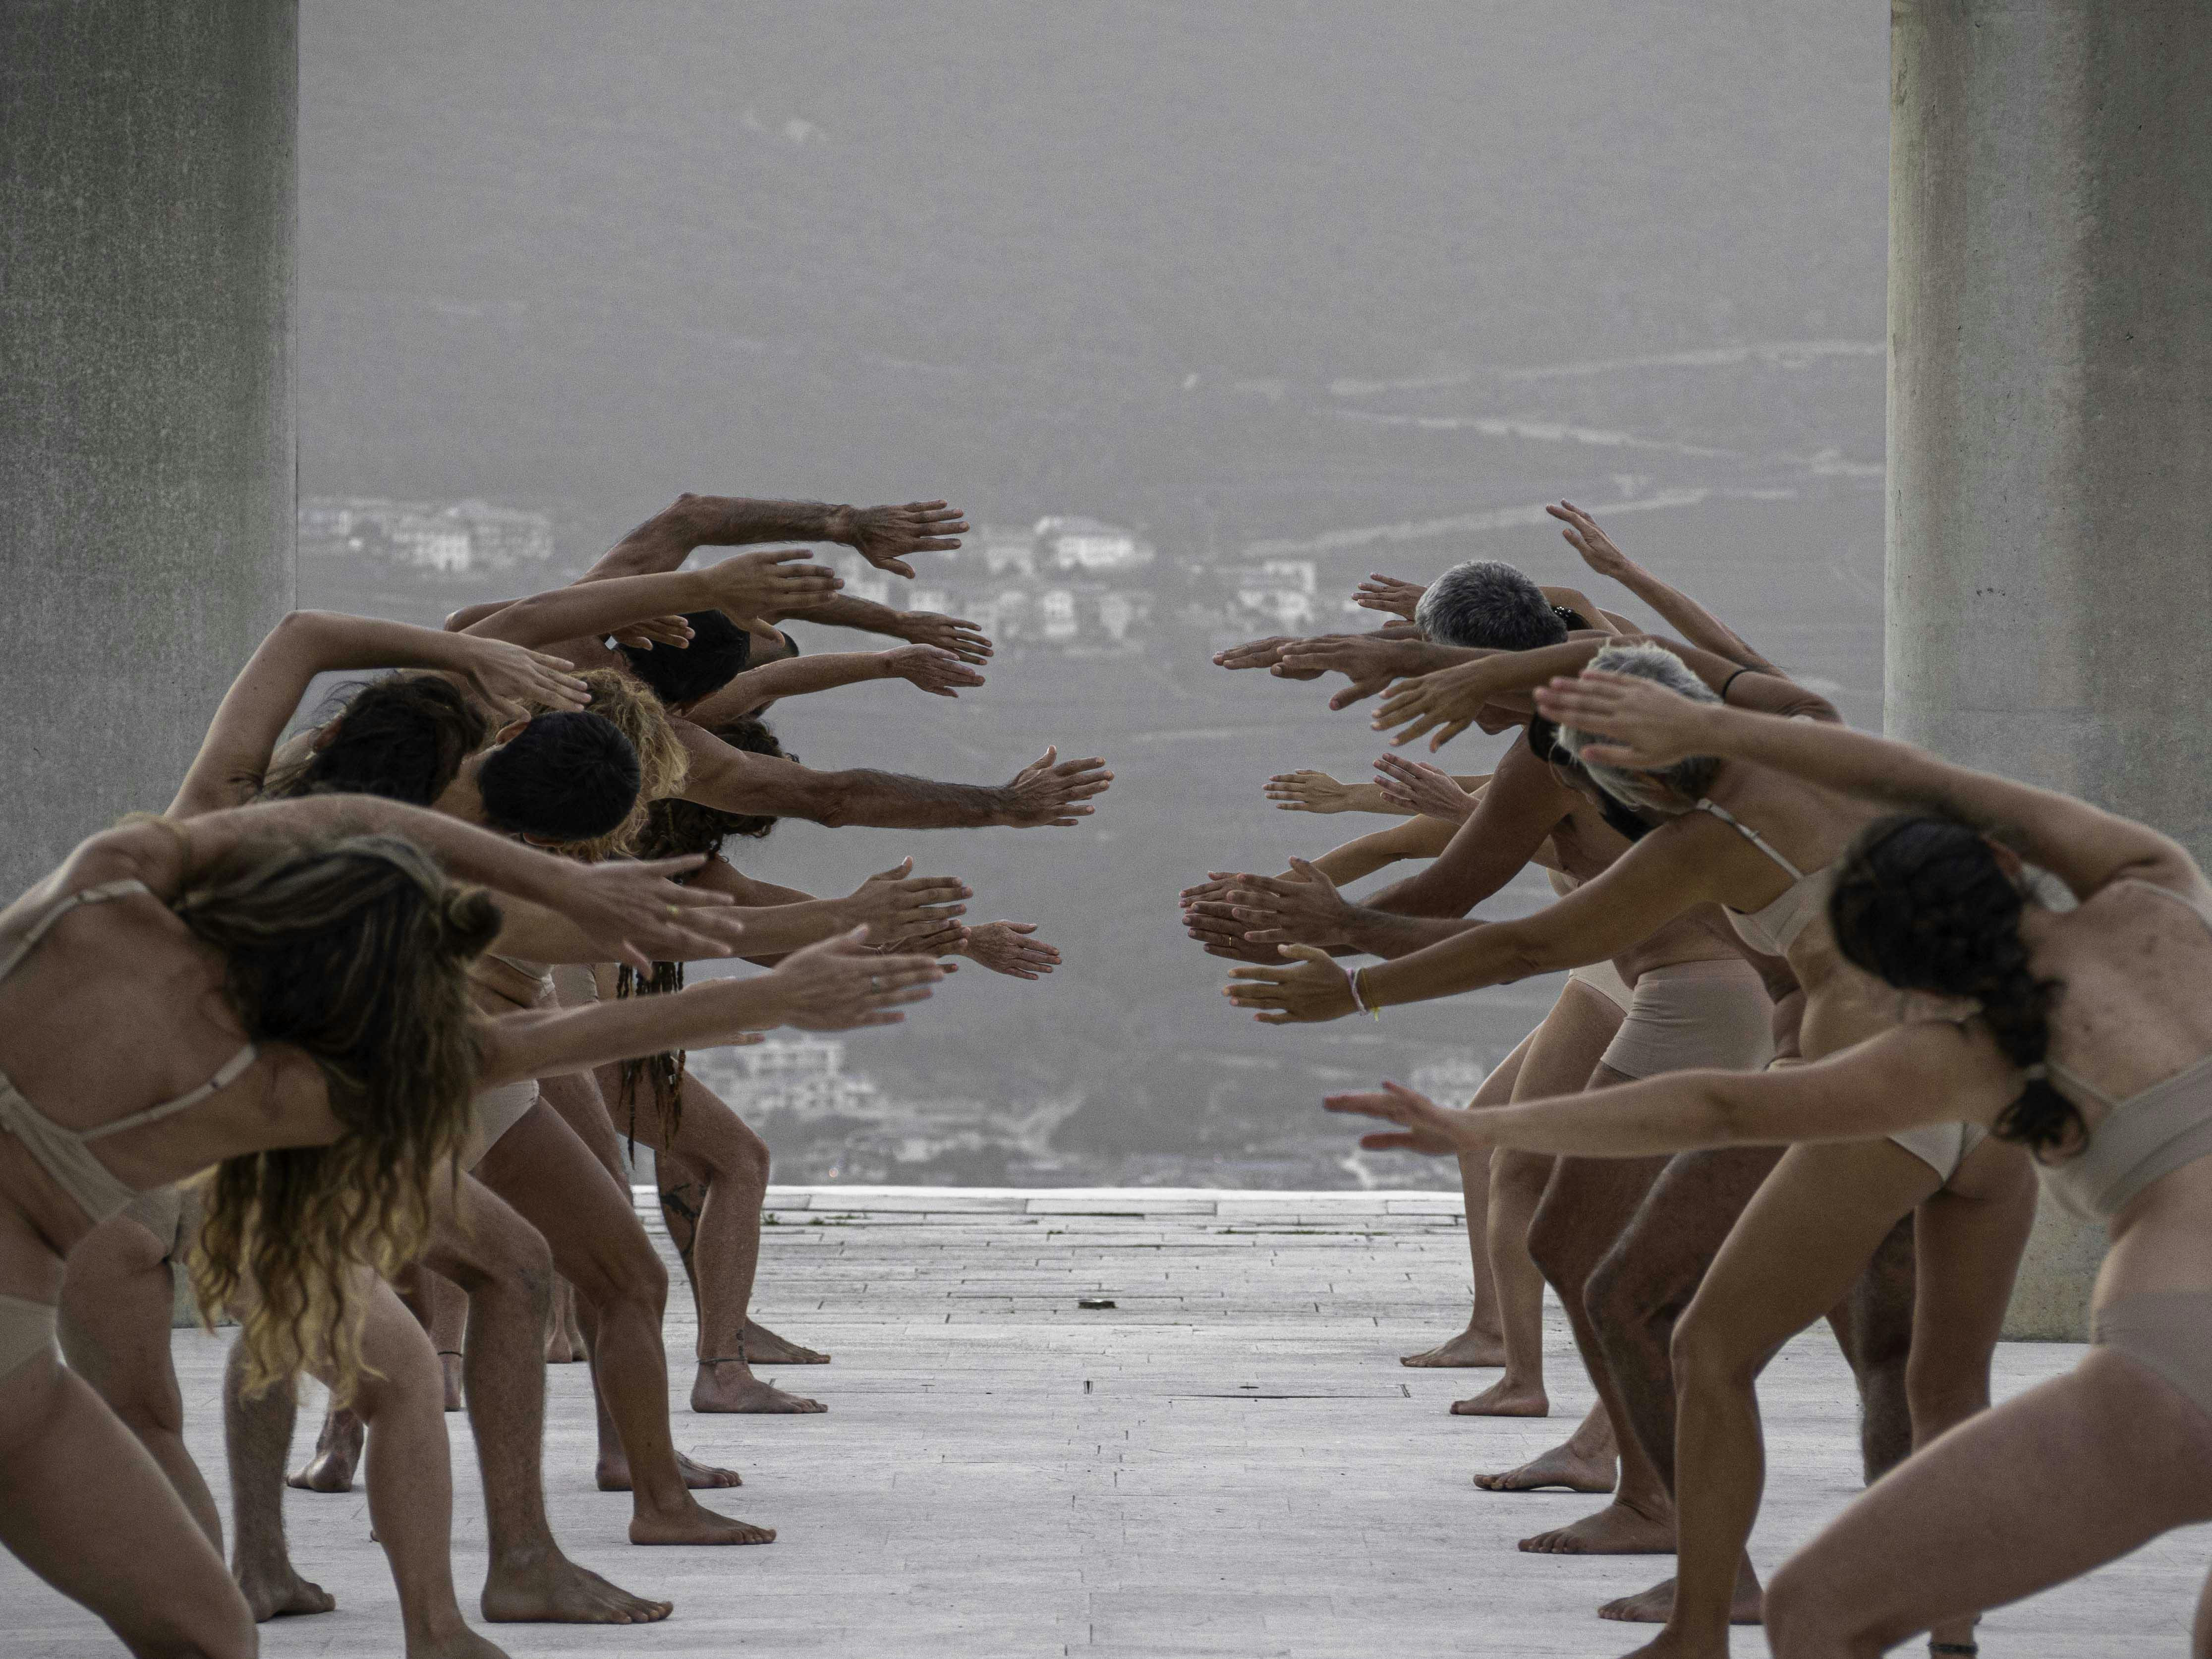 Two parallel rows of human bodies, shot frontally. The performers, wearing only flesh-colored underwear, stretch their arms and torso toward the center, trying to push themselves toward the opposite row.